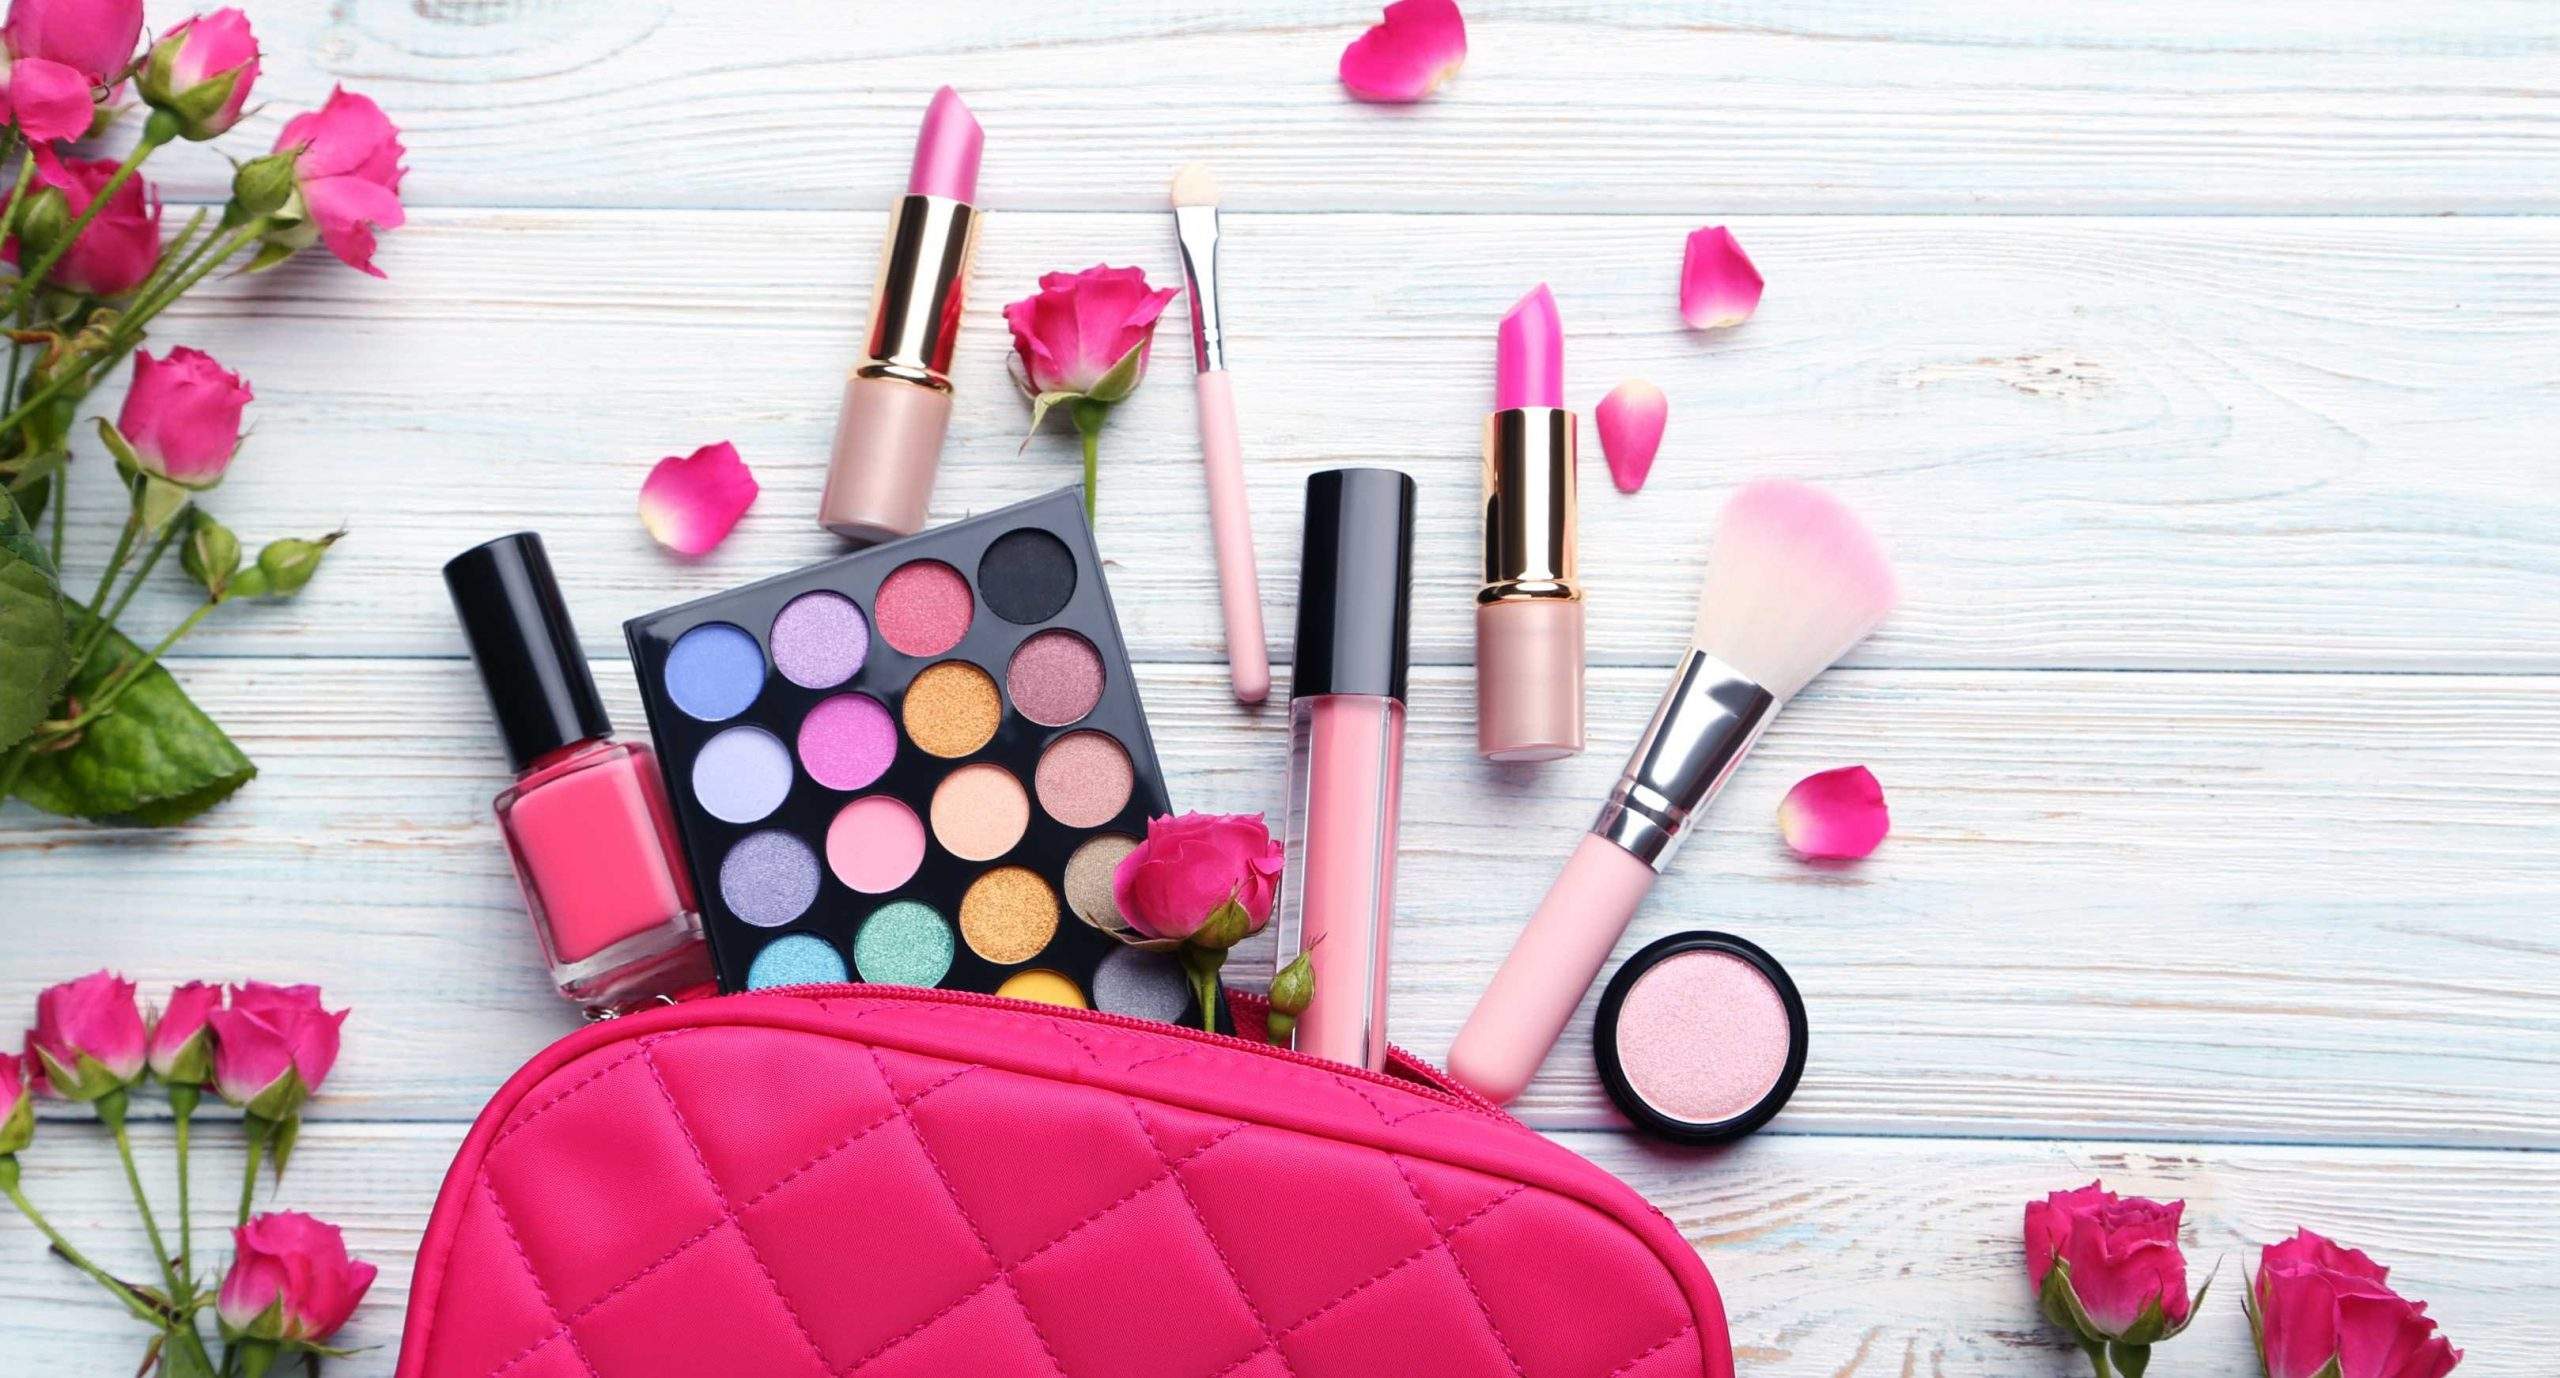 Must Follow the Market Trends to Sale More Cosmetic Products